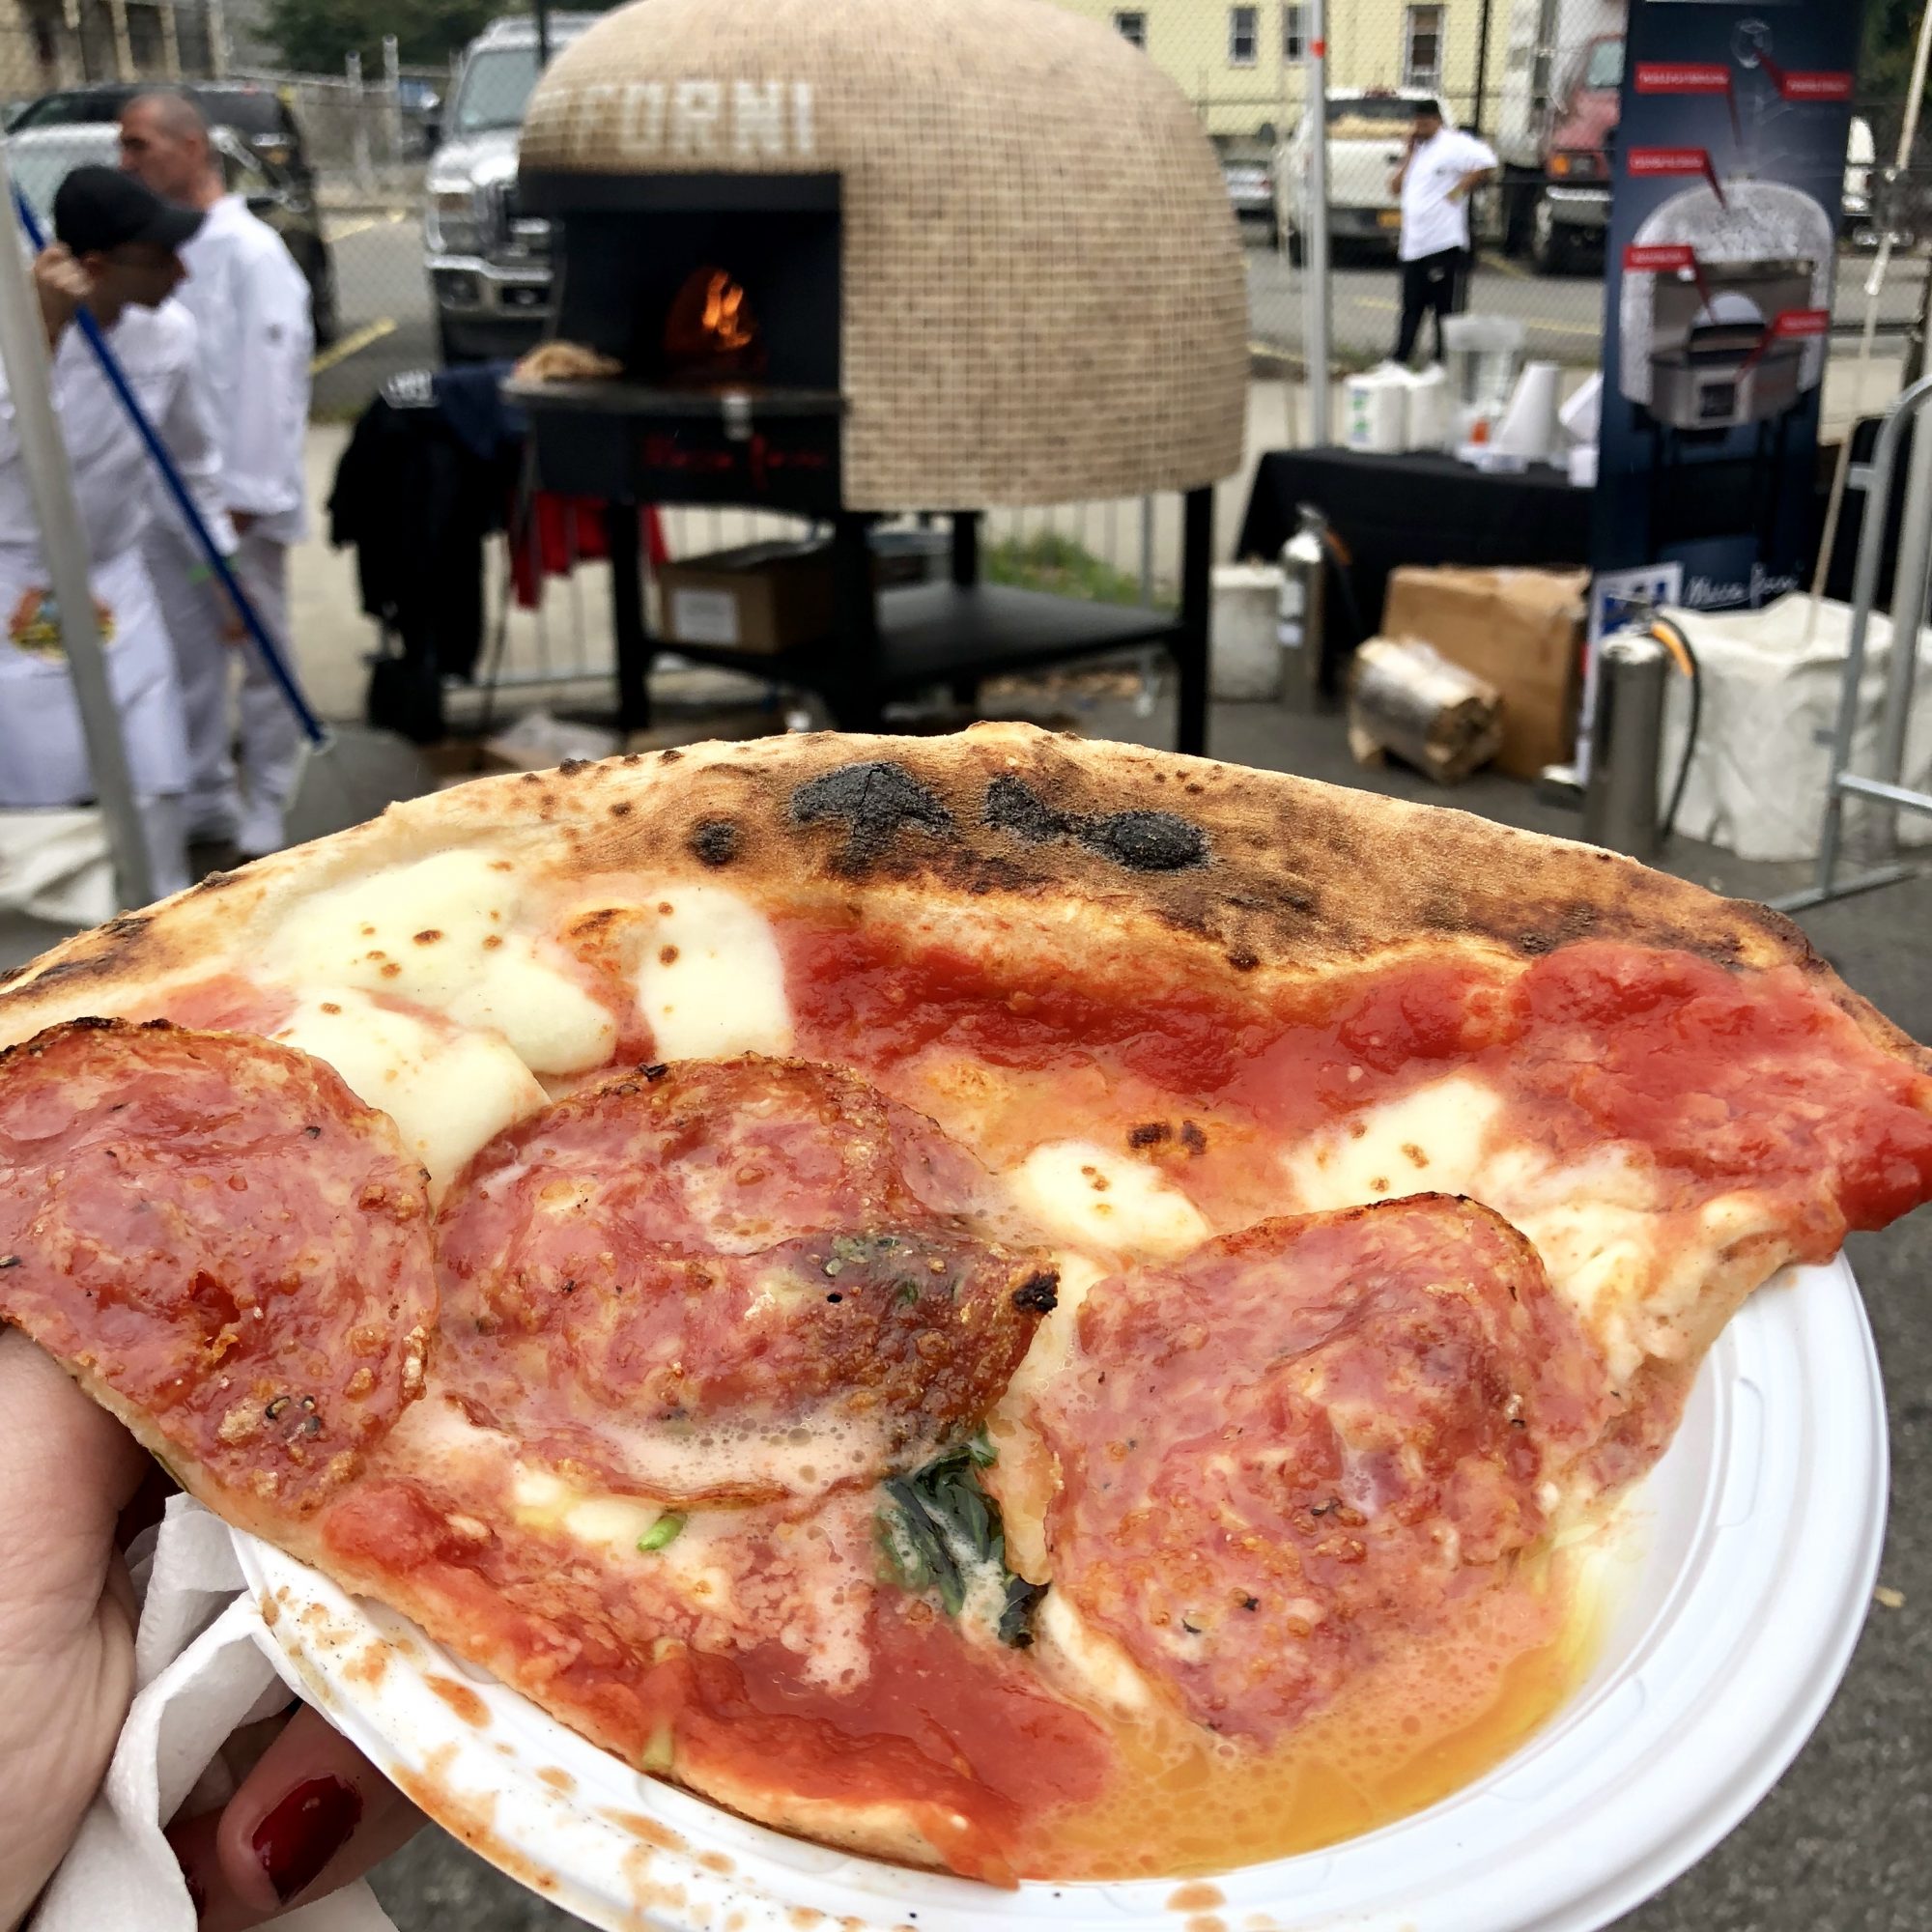 Slice of pizza with pepperoni in front of a portable pizza oven at the 2019 NY Pizza Festival in the Bronx